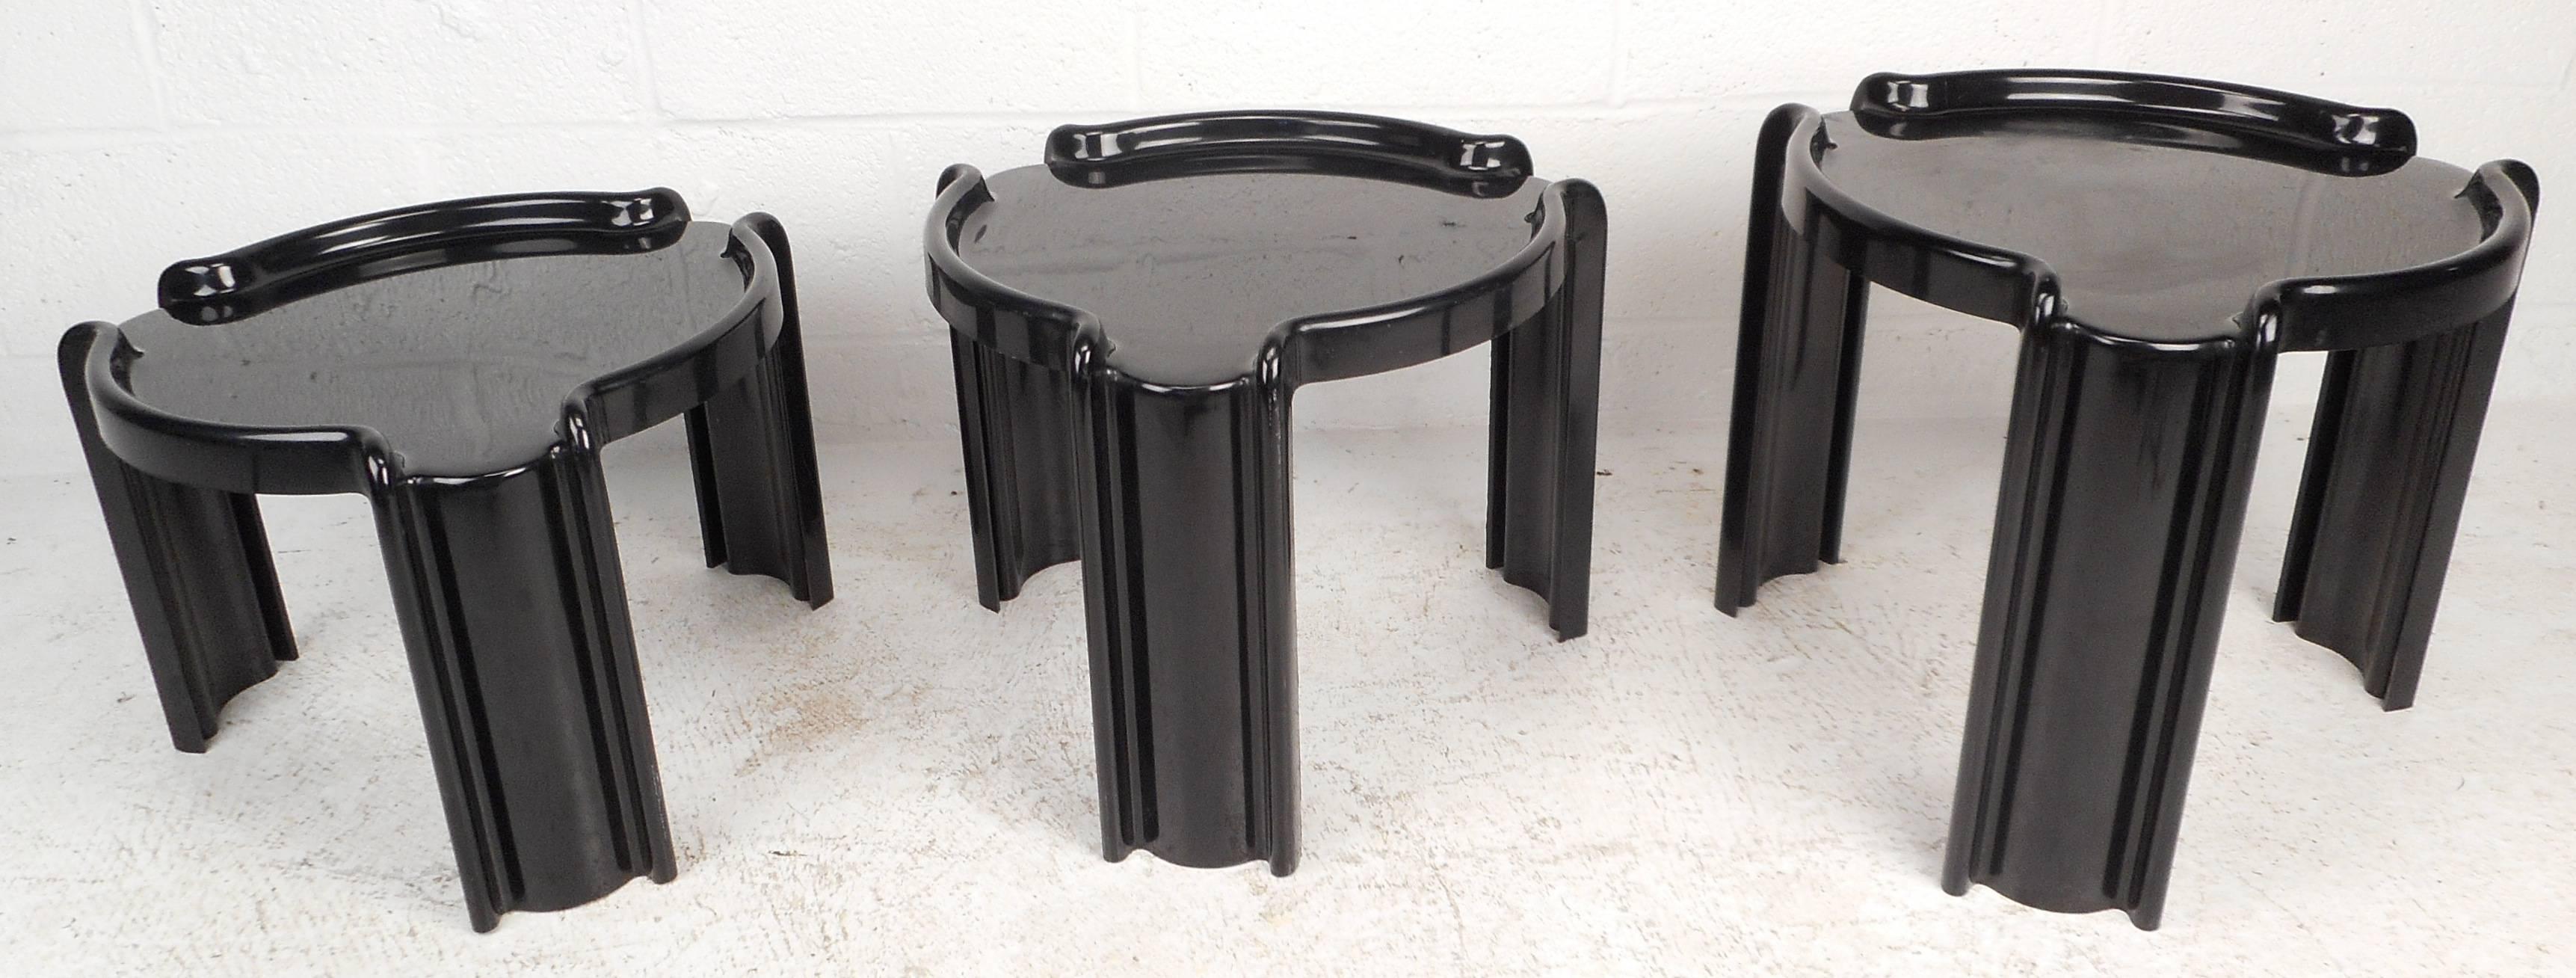 giotto stoppino kartell table